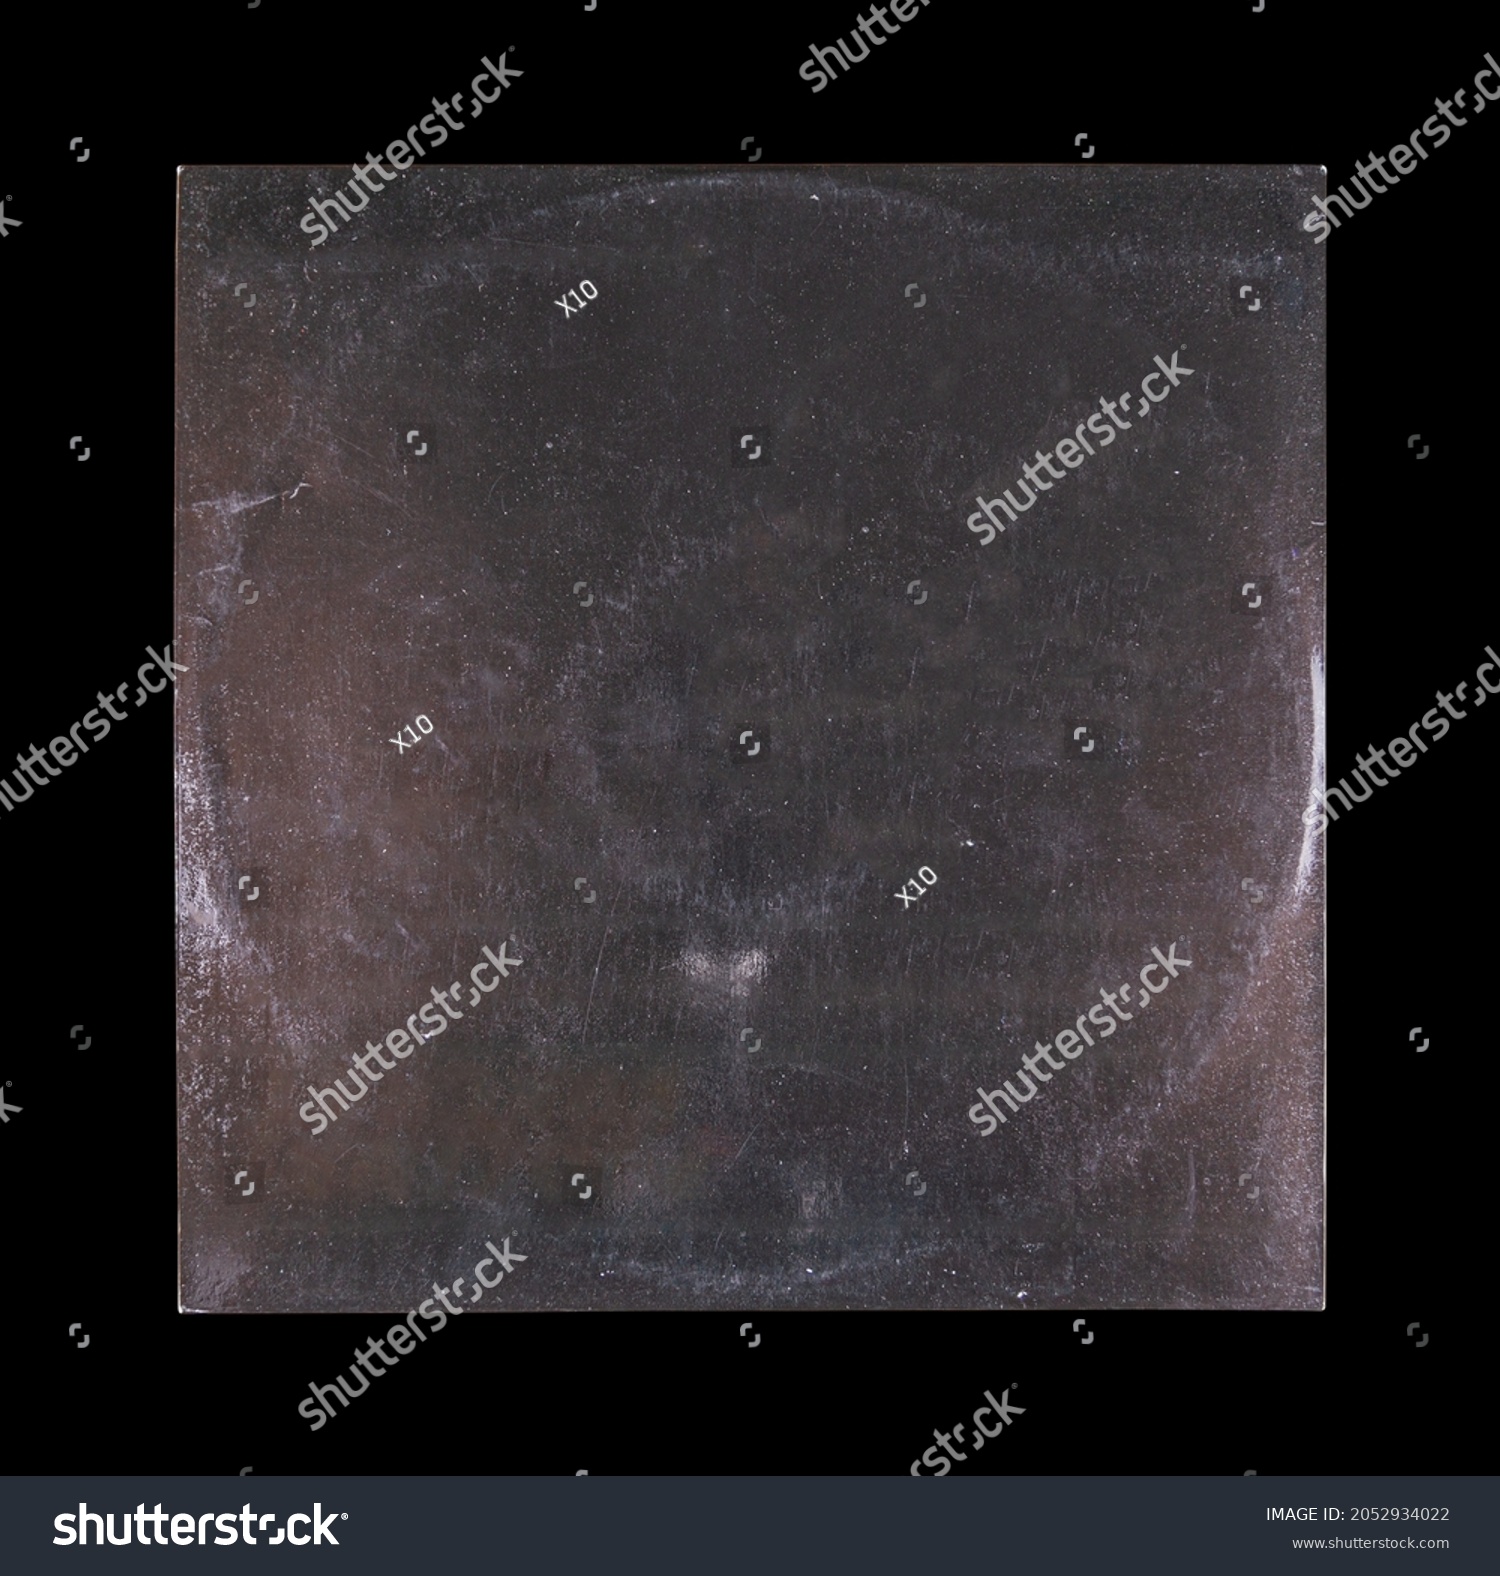 Mockup of vinyl music disc. Music lp retro vinyl disc template. Old Vinyl CD Record Cover Package Envelope. Black Scratched Shabby Paper Cardboard Square Texture.  #2052934022